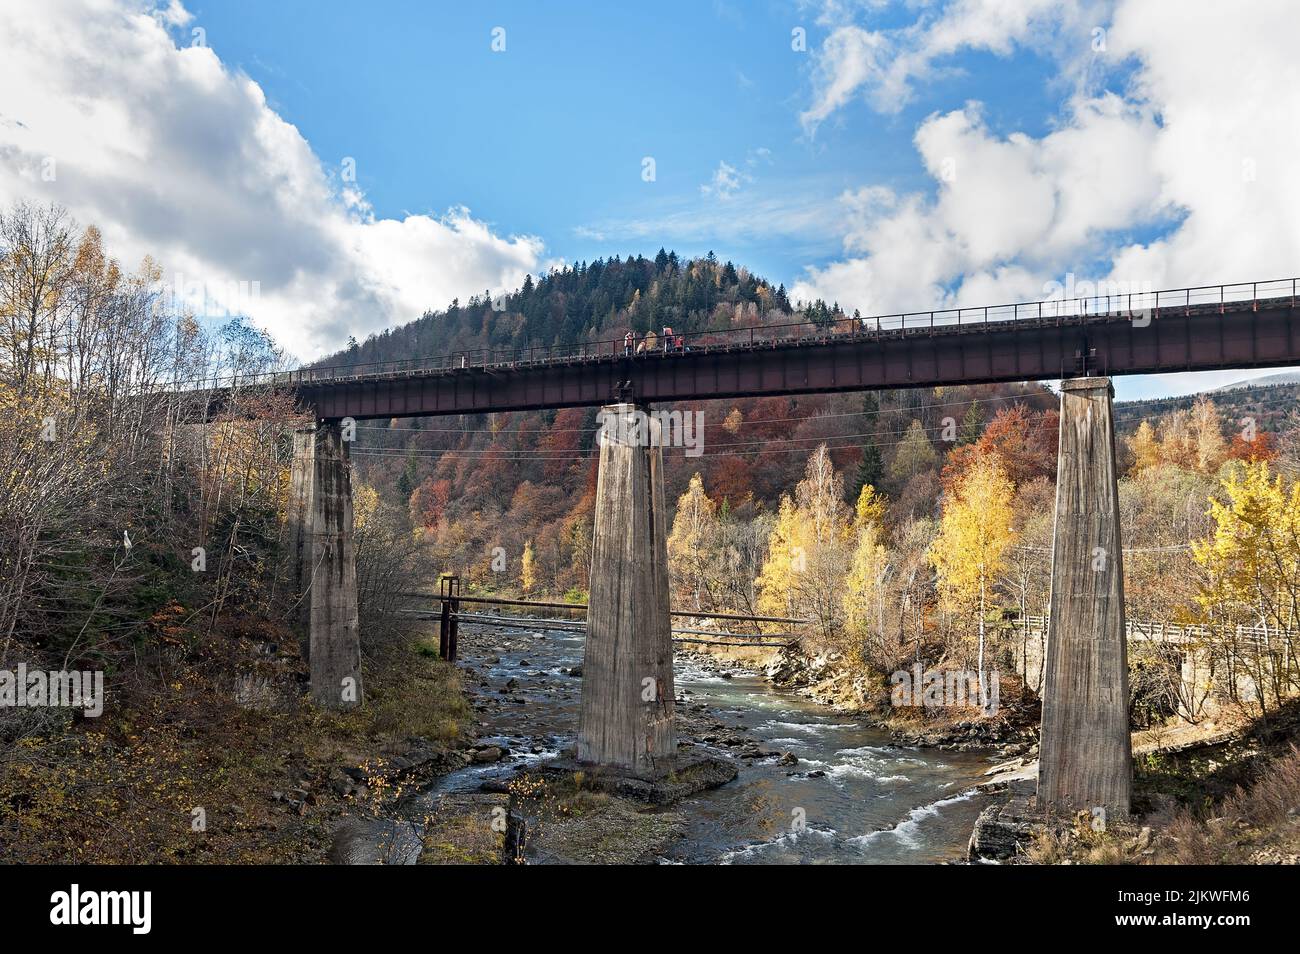 The picturesque view to the bridge over the river Prut in Yaremche, Ukraine Stock Photo